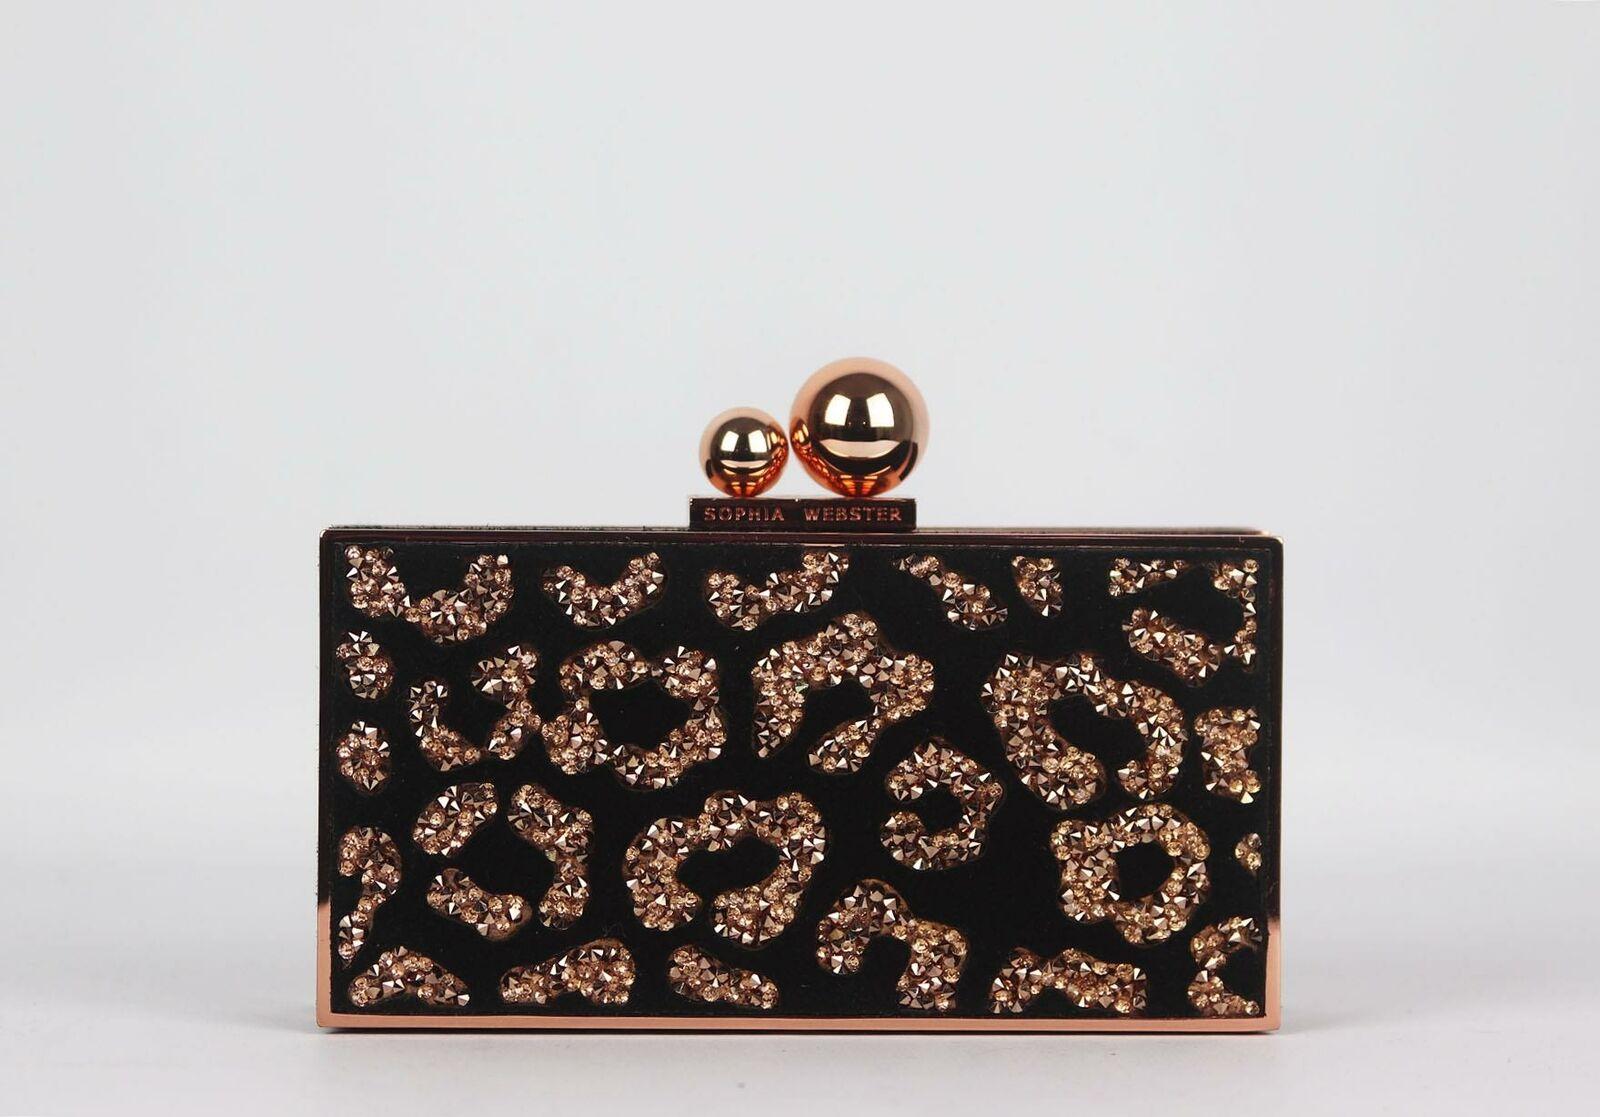 The glittering crystals embellishing Sophia Webster's 'Clara' clutch in a leopard-print are perfectly in-tune with the label's modern femininity, the structured shape is crafted with a rose-gold metal frame that opens via a logo-engraved magnetic